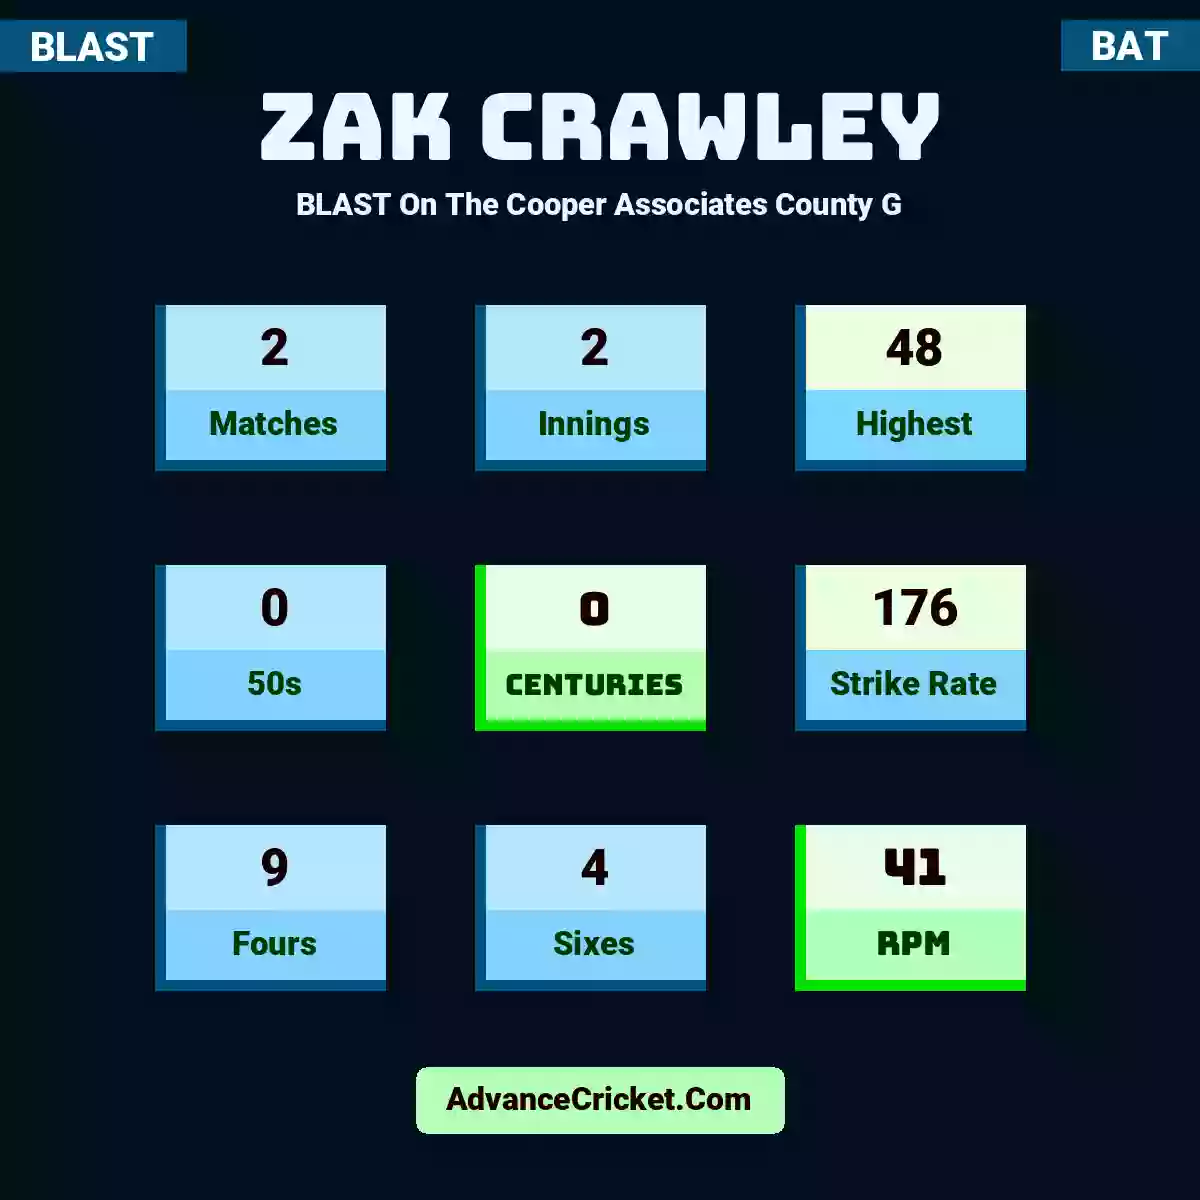 Zak Crawley BLAST  On The Cooper Associates County G, Zak Crawley played 2 matches, scored 48 runs as highest, 0 half-centuries, and 0 centuries, with a strike rate of 176. Z.Crawley hit 9 fours and 4 sixes, with an RPM of 41.